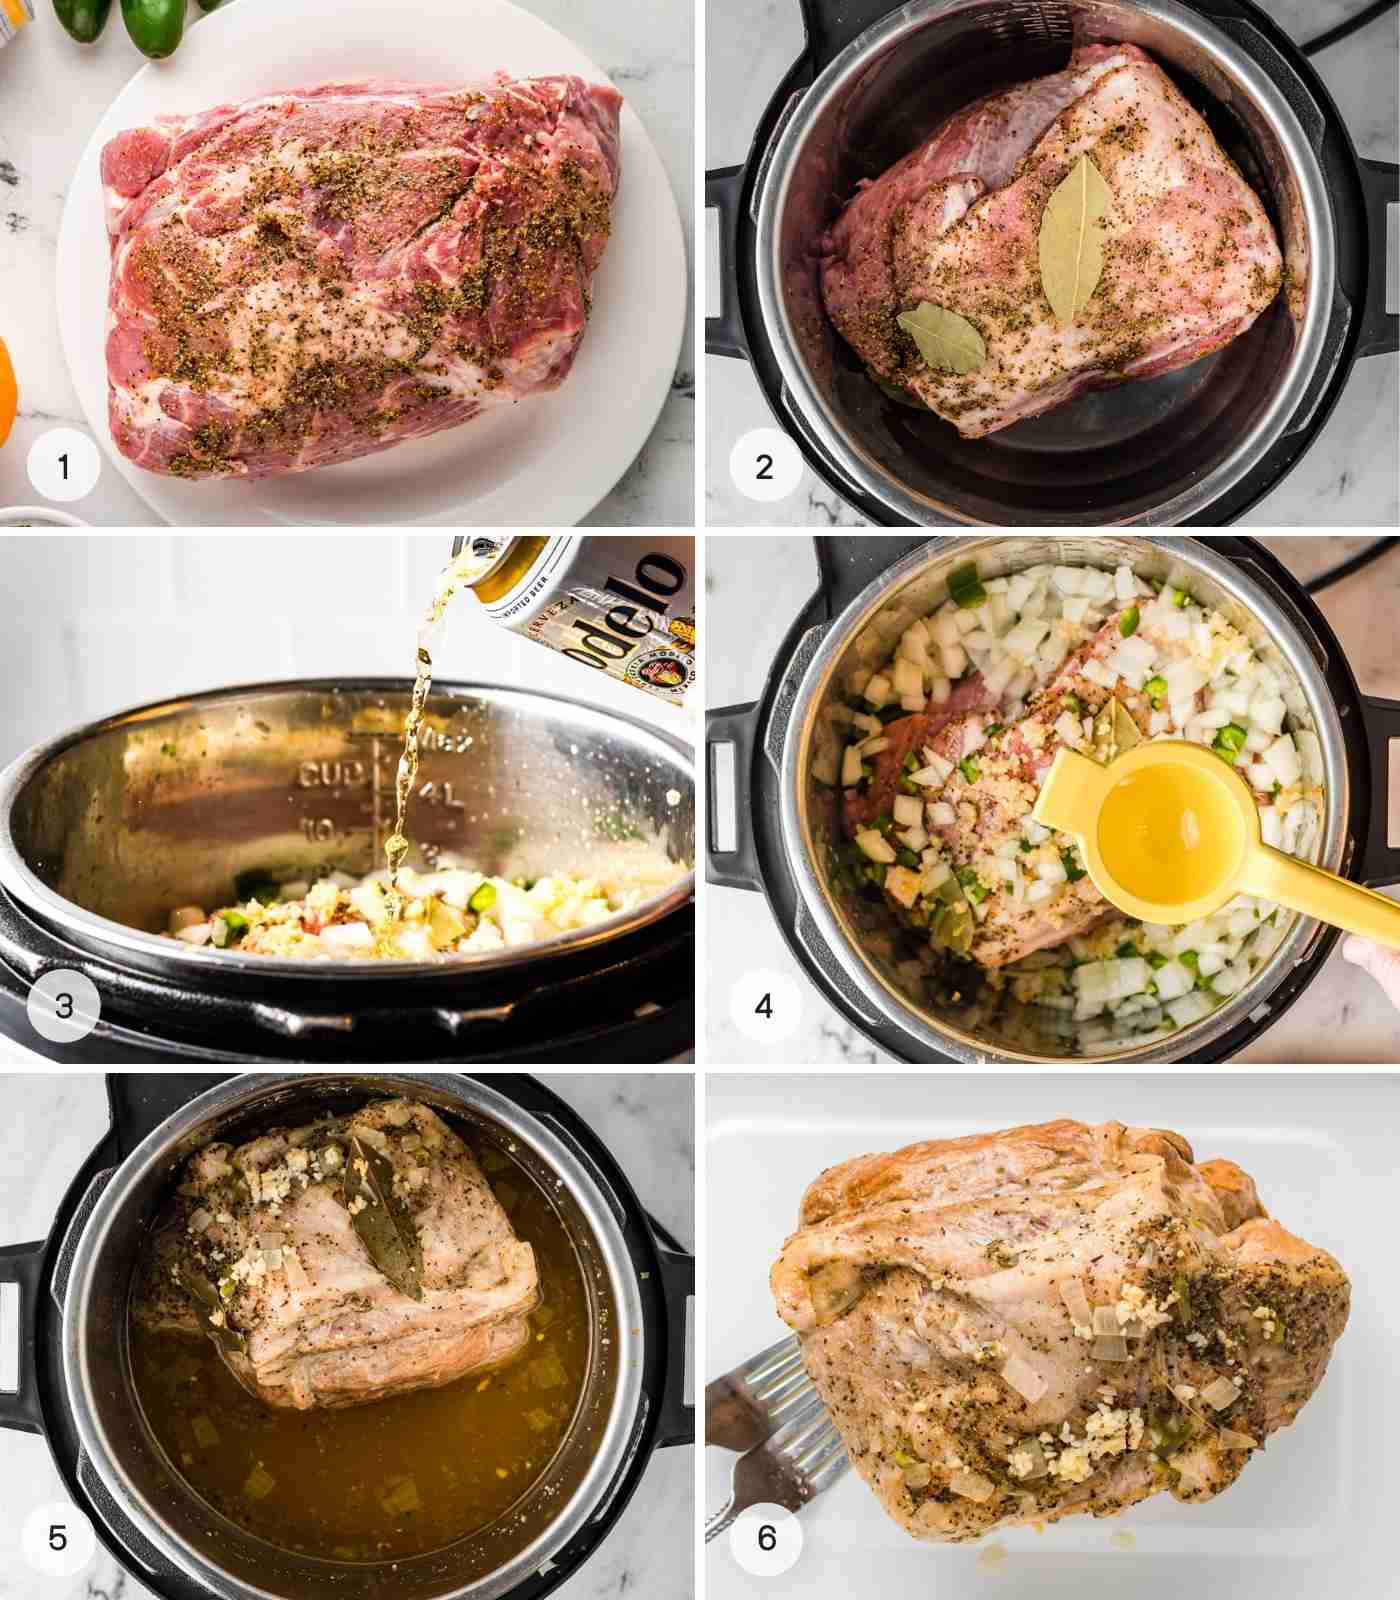 How to make carnitas in the instant pot, a collage with 6 images including how to season the meat, adding the rest of the ingredients, and pressure cooking it.